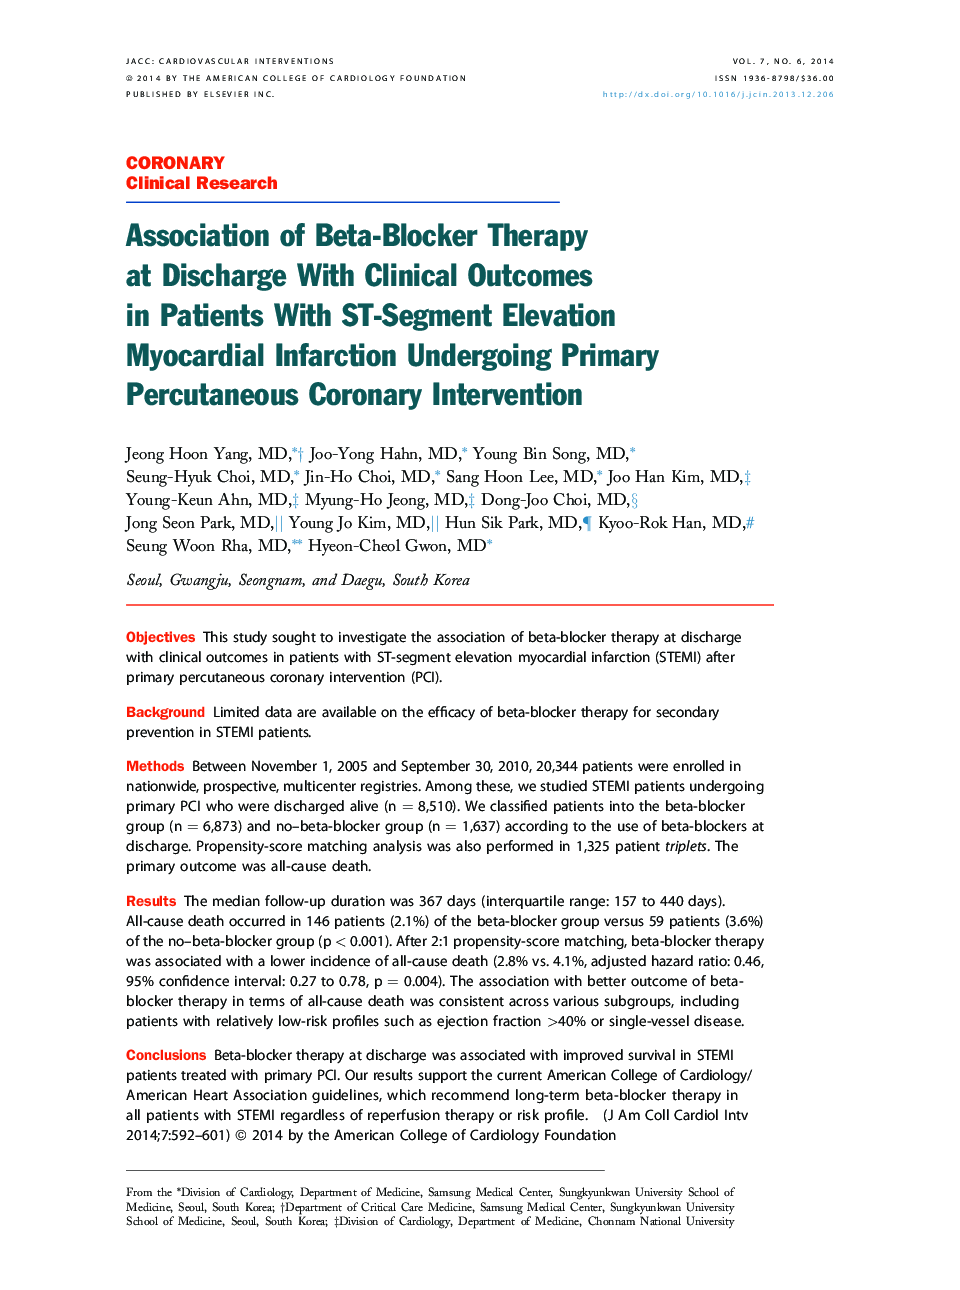 Association of Beta-Blocker Therapy at Discharge With Clinical Outcomes in Patients With ST-Segment Elevation Myocardial Infarction Undergoing Primary Percutaneous Coronary Intervention 